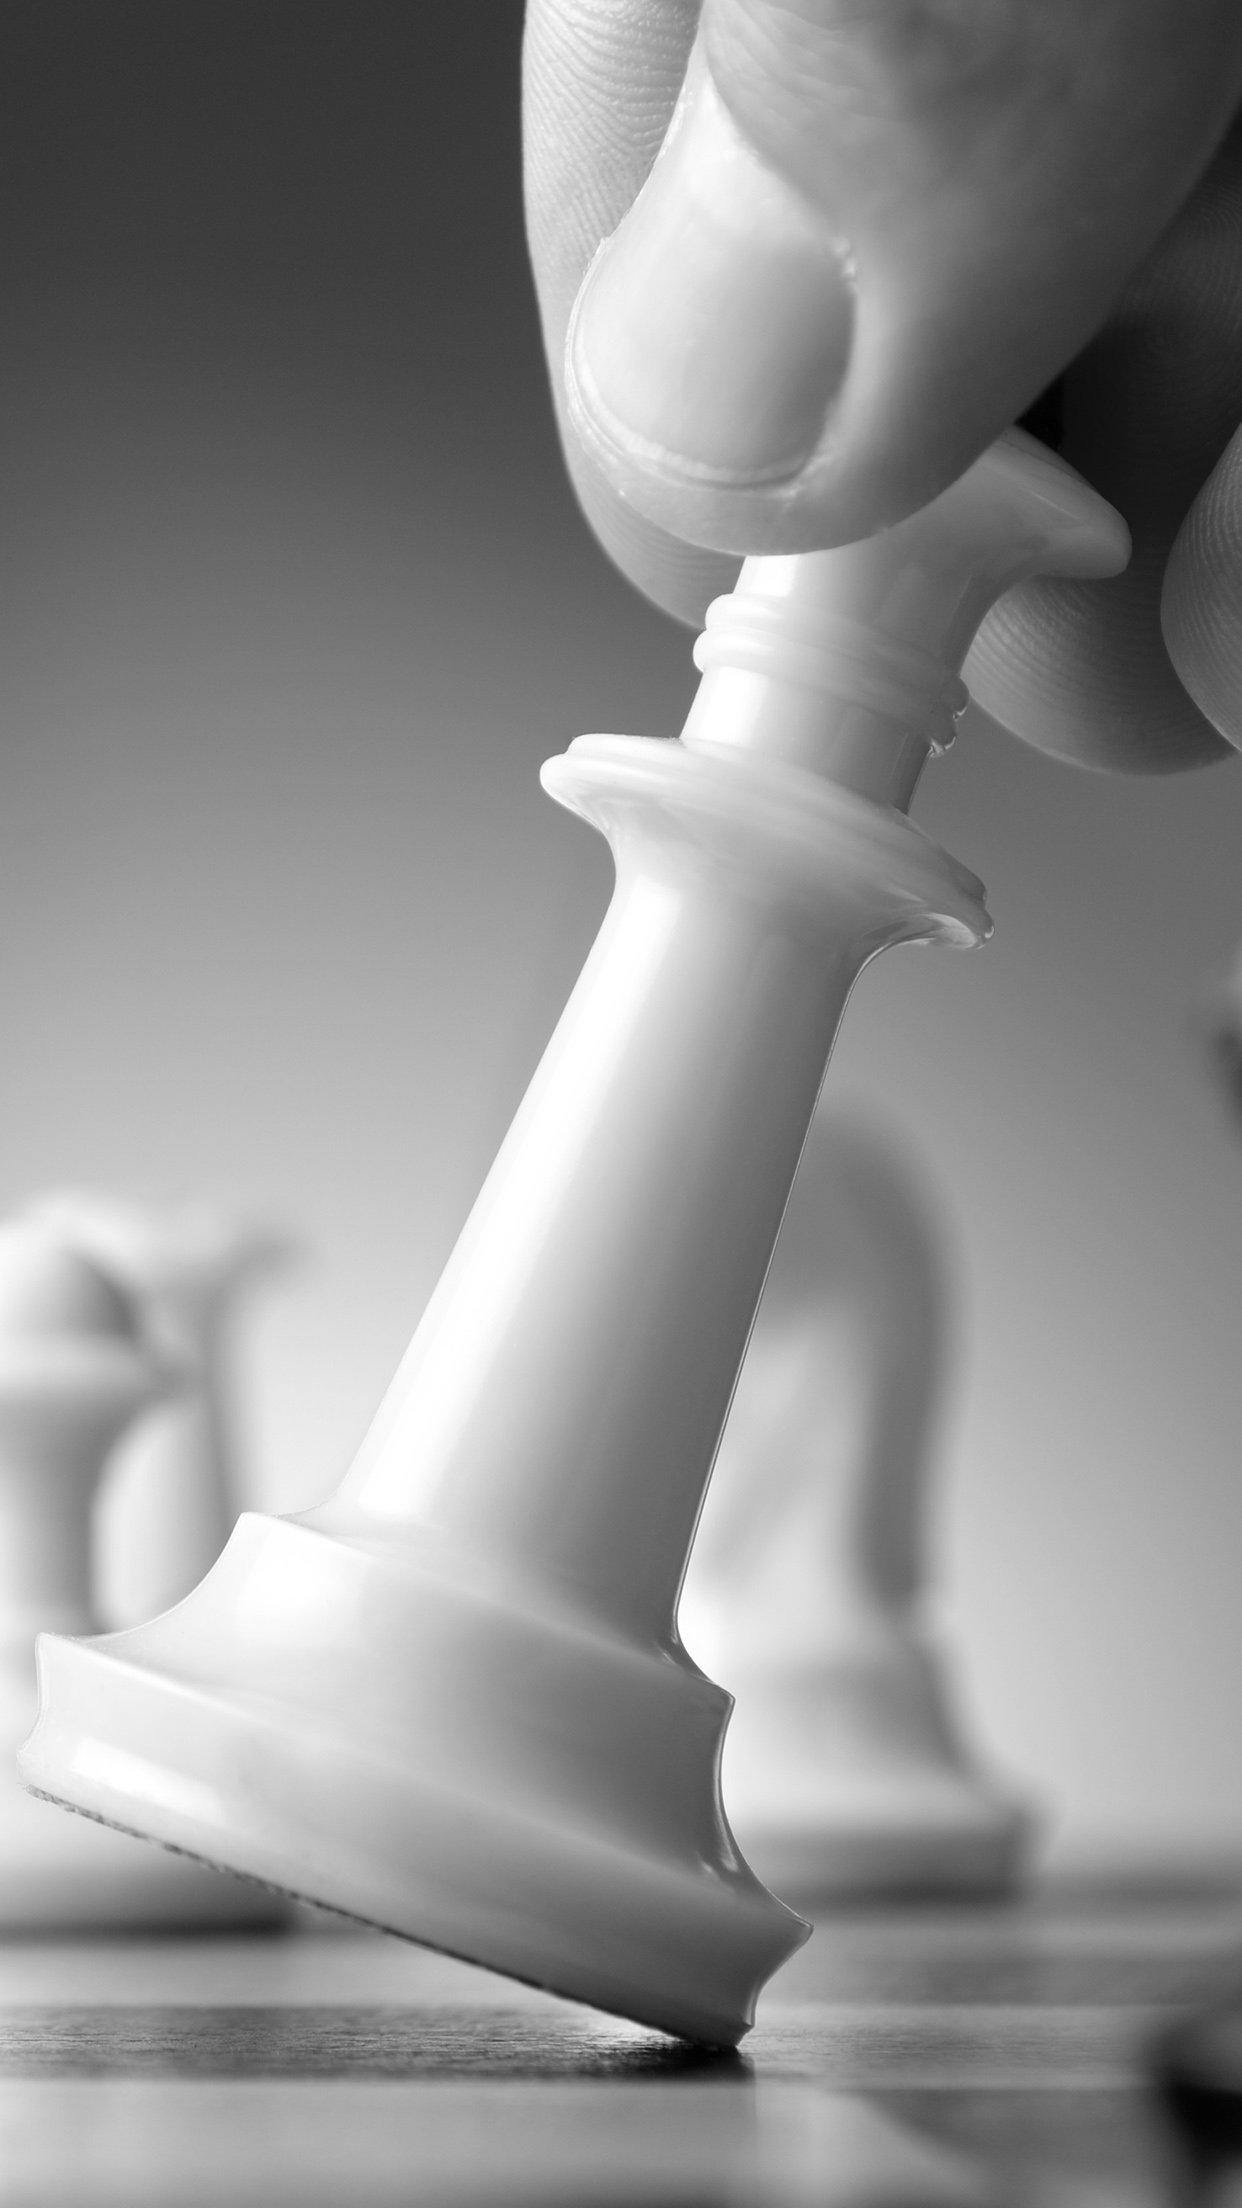 Chess 2 Wallpaper for iPhone Pro Max, X, 6